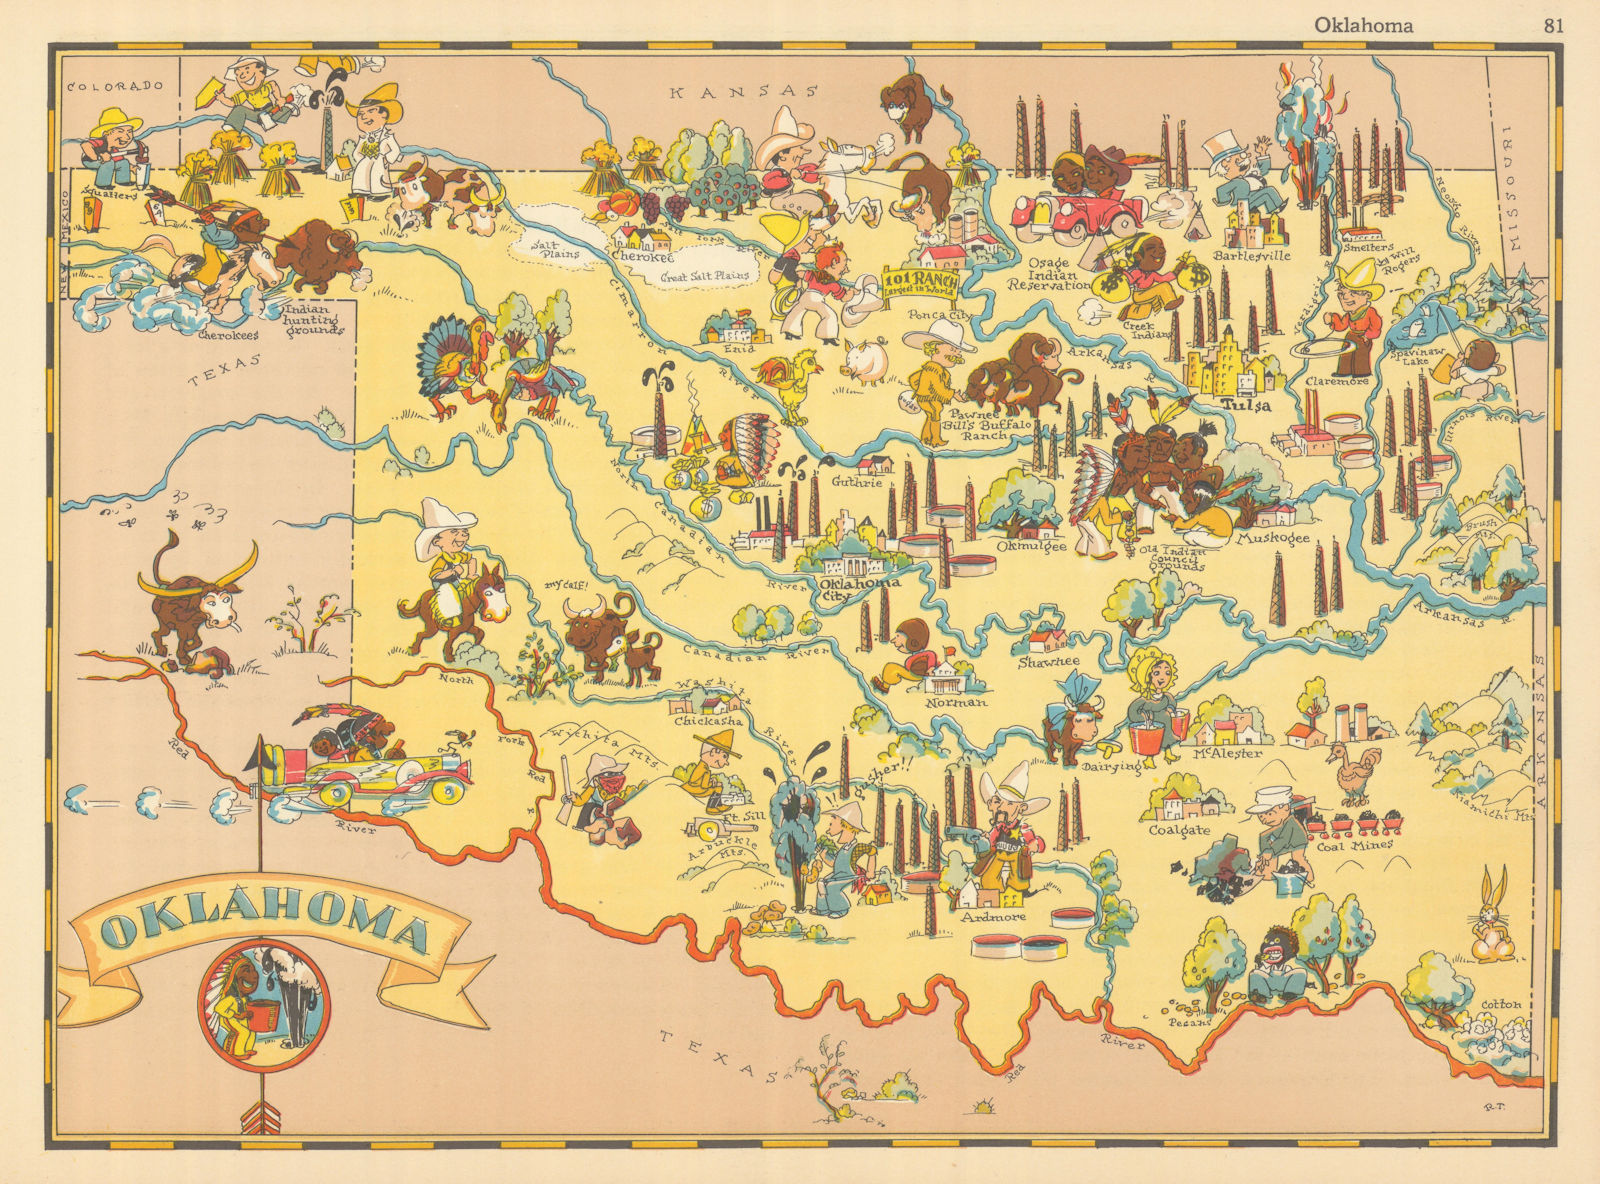 Associate Product Oklahoma. Pictorial state map by Ruth Taylor White 1935 old vintage chart